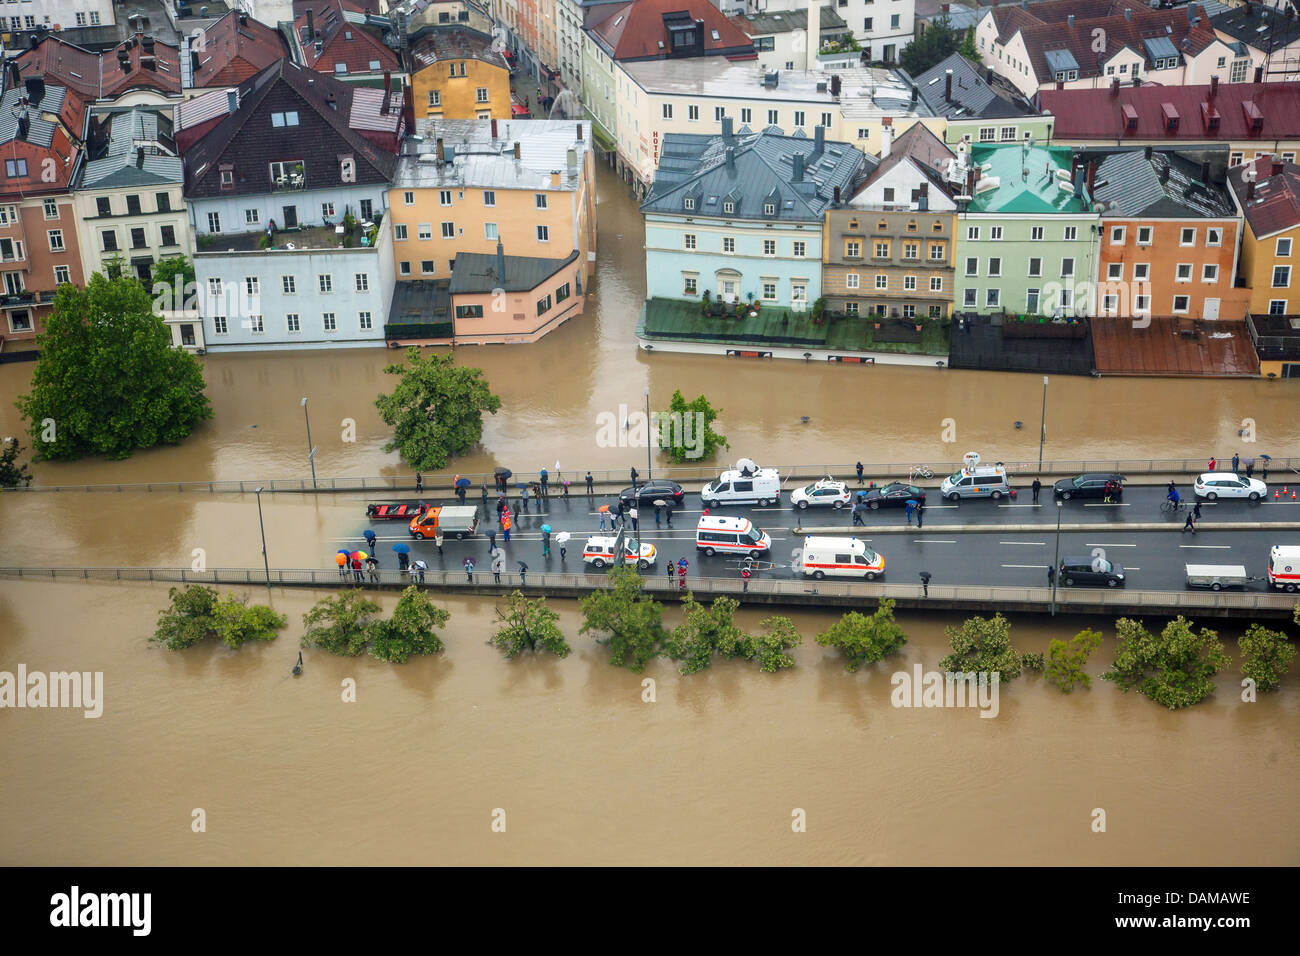 street Regensburger Strasse in the old city flooded in June 2013, Germany, Bavaria, Passau Stock Photo